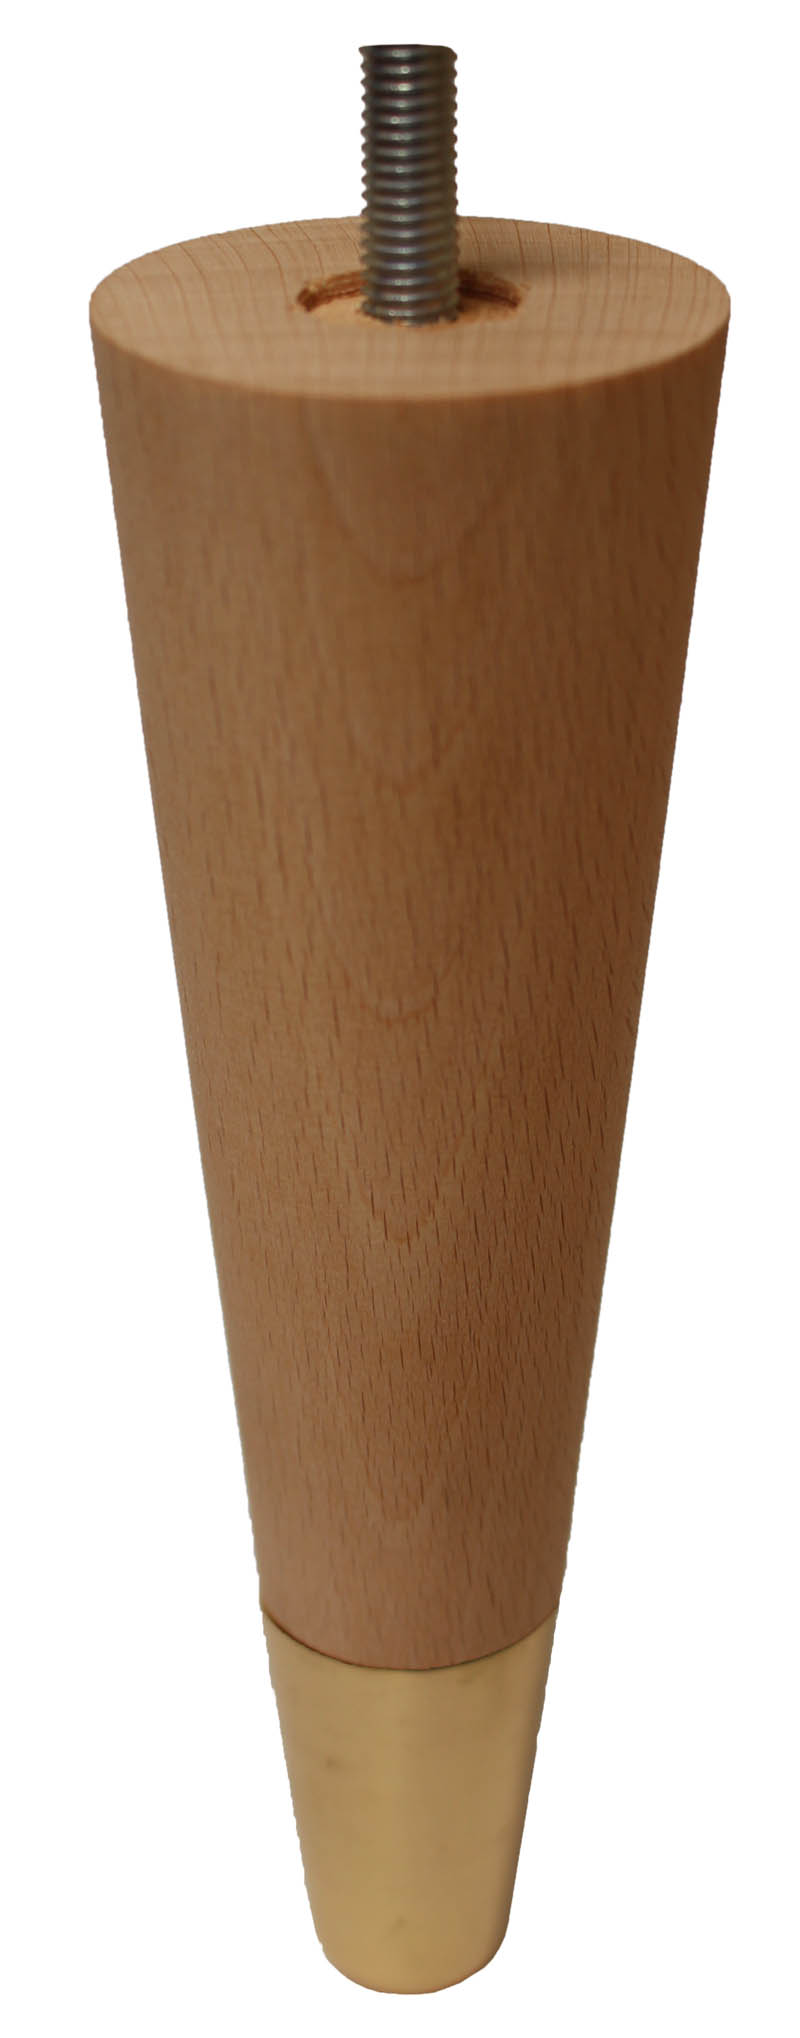 Sonia Solid Beech Tapered Furniture Legs - Raw Finish - Brass Slipper Cups - Set of 4